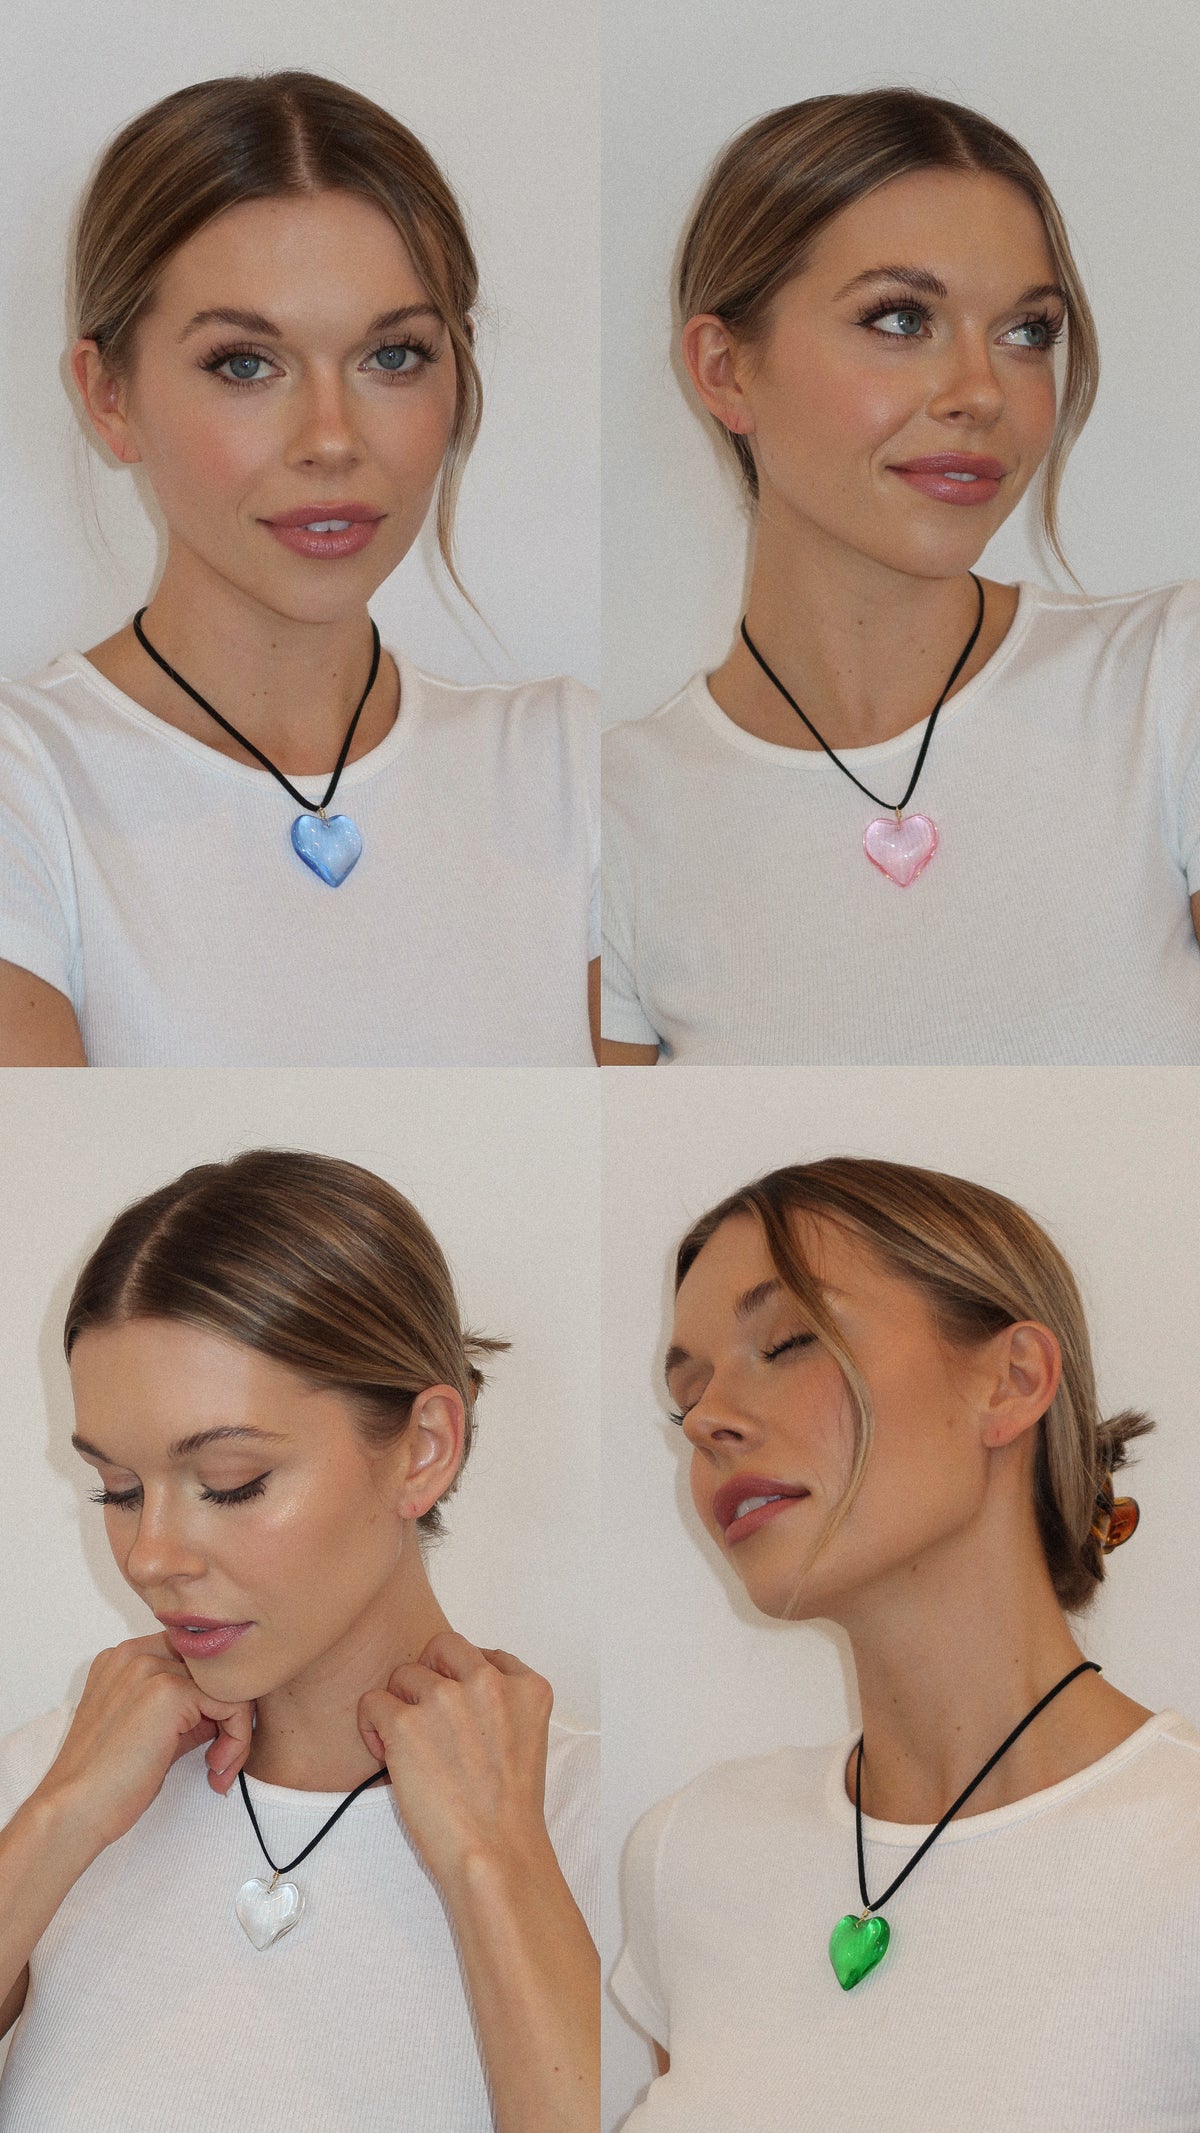 GLASS PUFF HEART PENDANT NECKLACE (LEATHER)